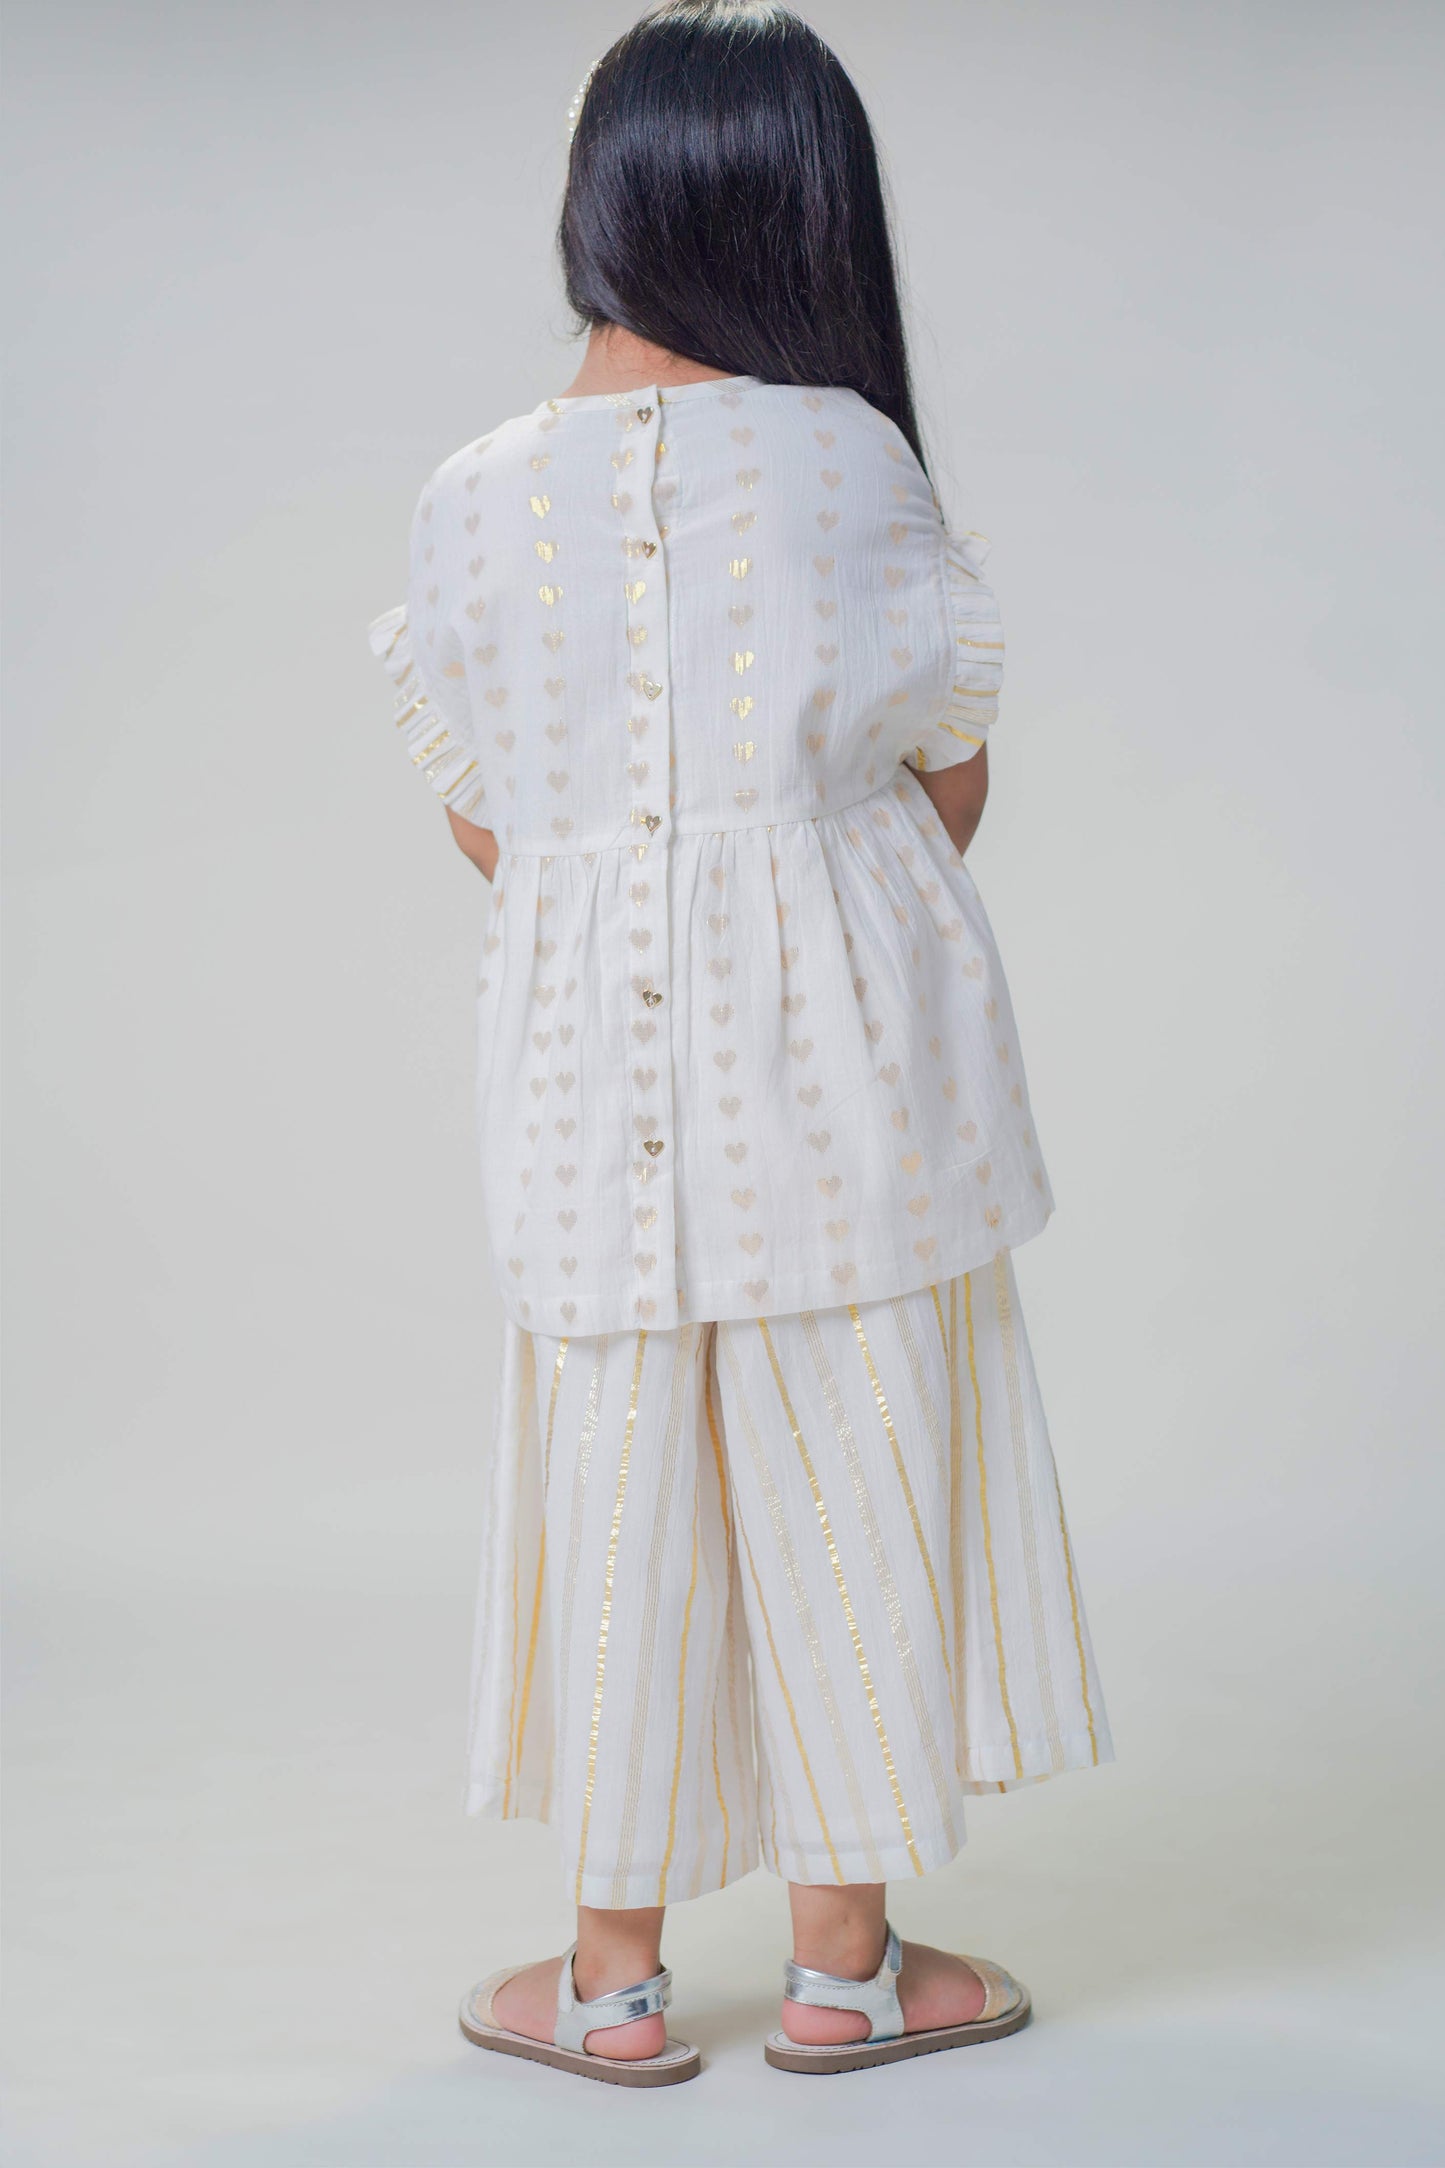 Shop Girl Golden Culottes and Top Set-White by Tiber Taber Kids